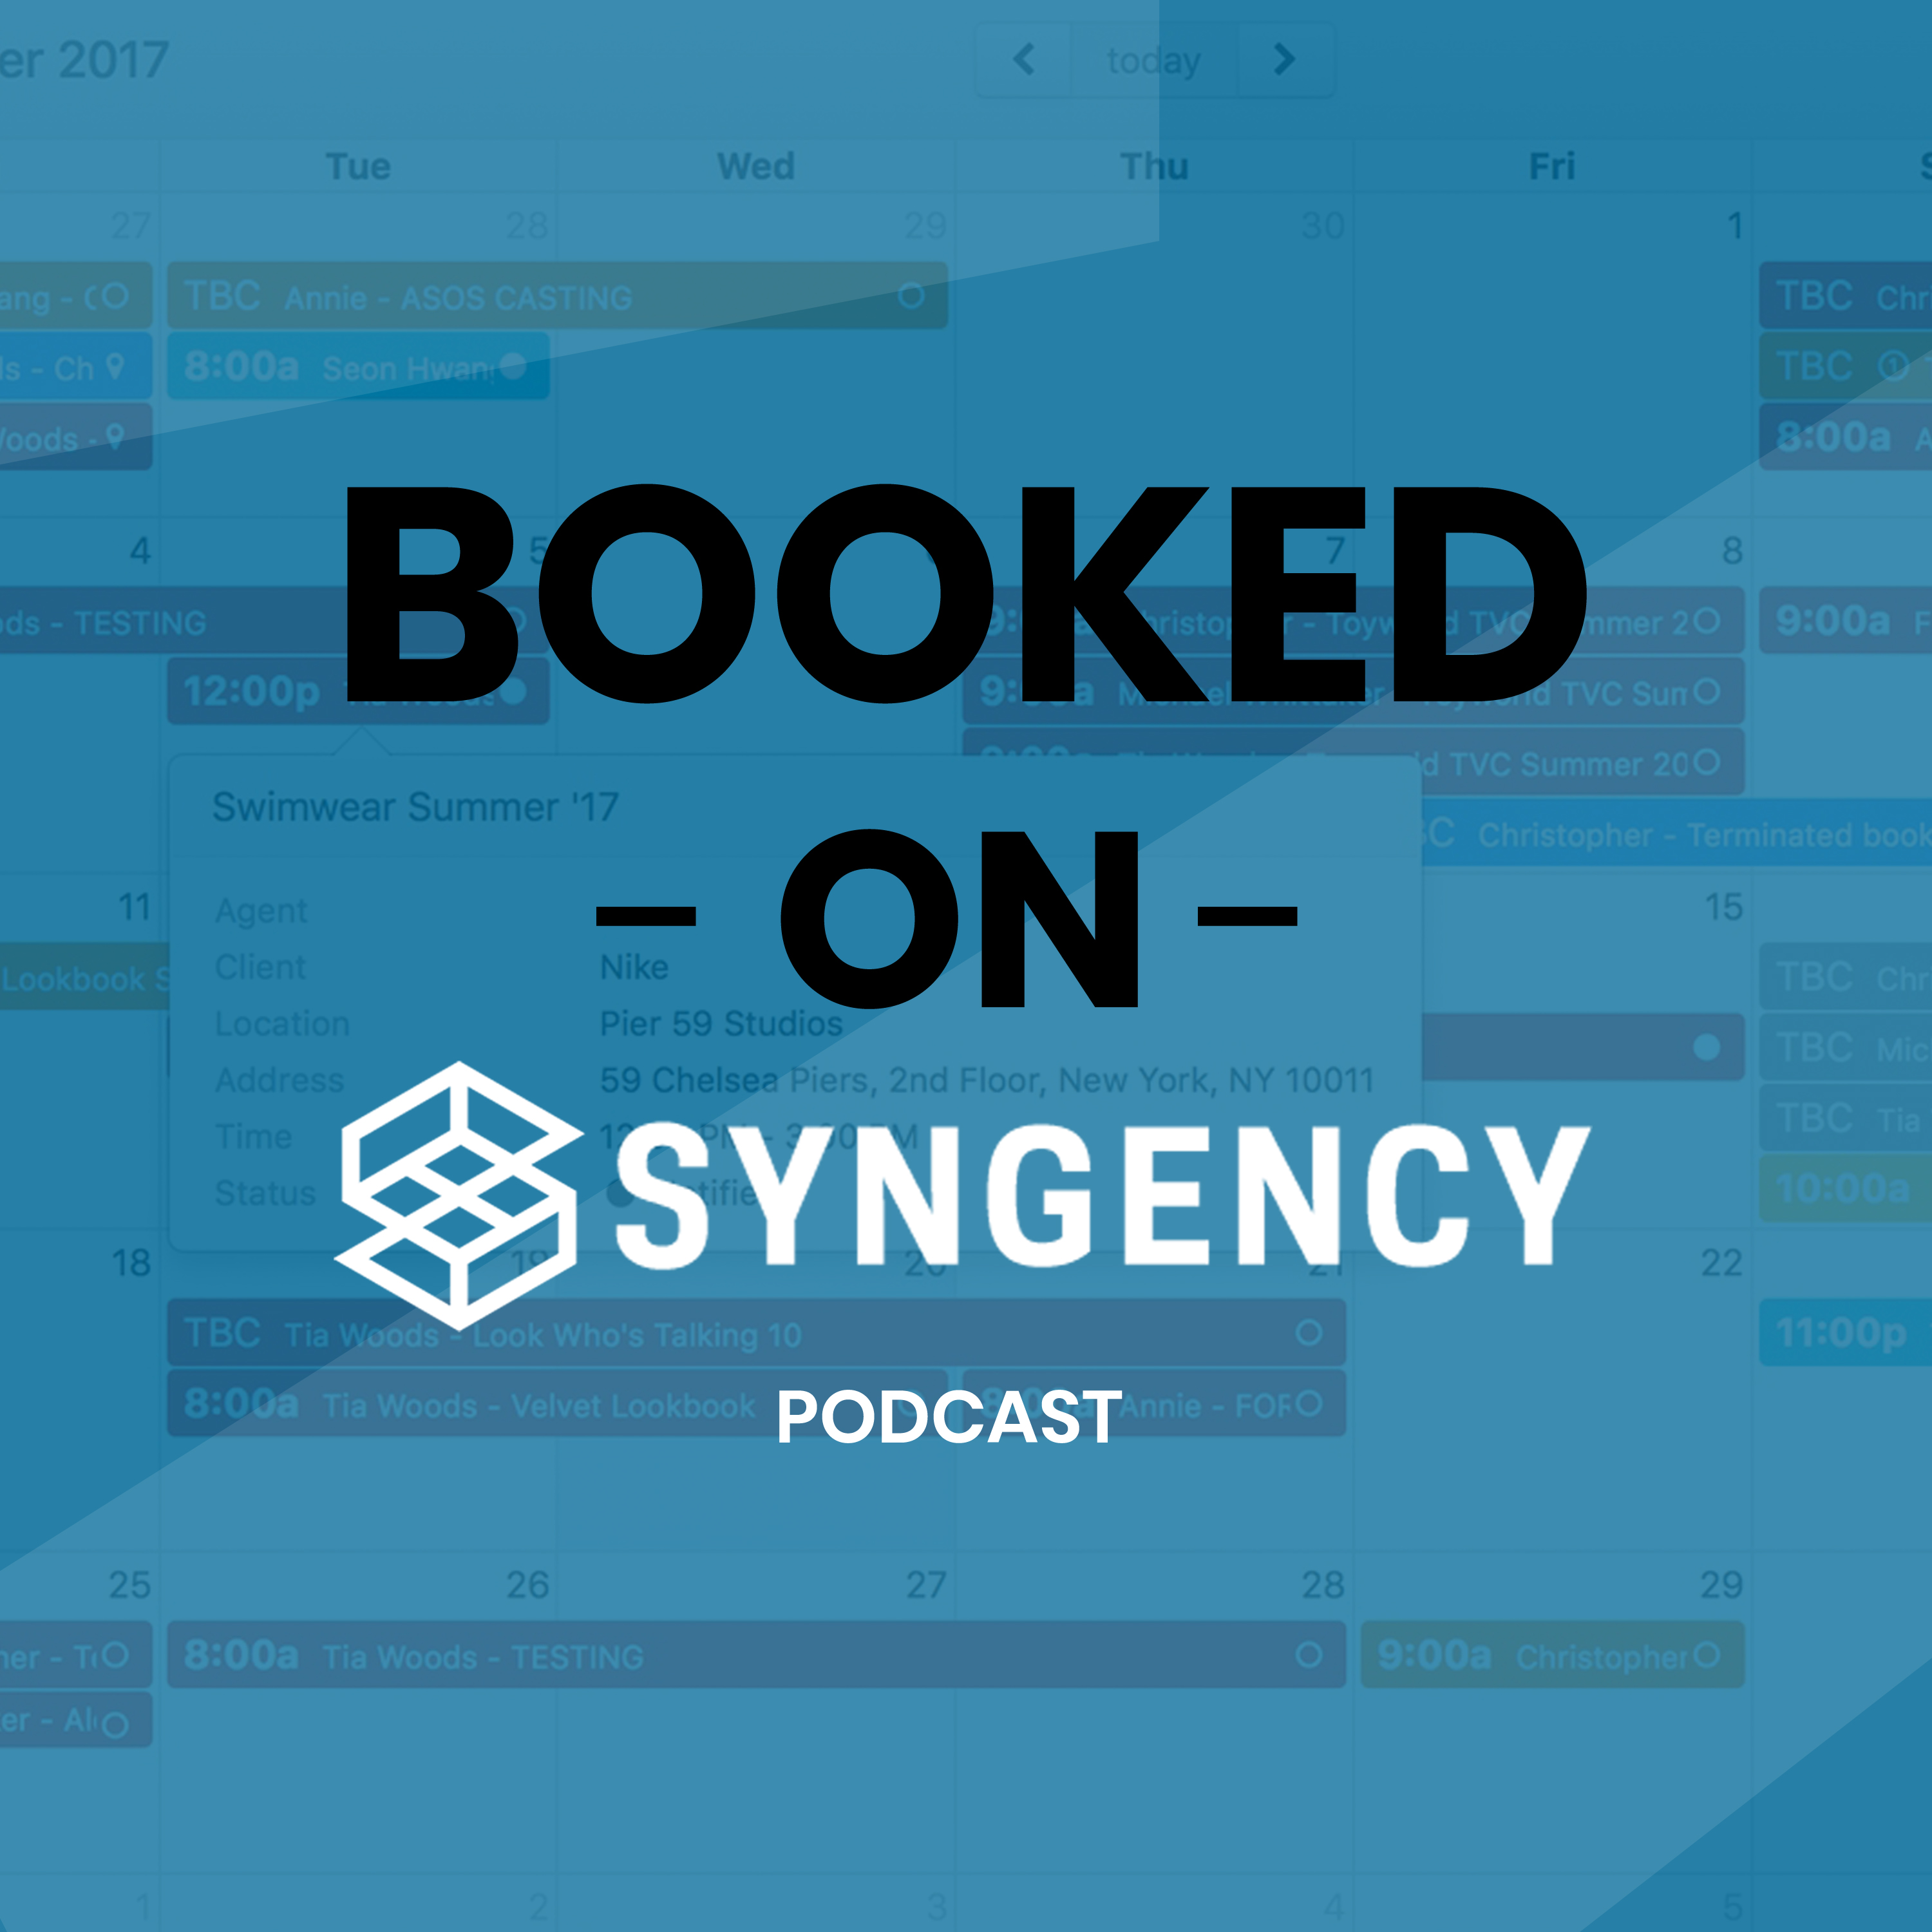 Introducing the BOOKED ON SYNGENCY Podcast!